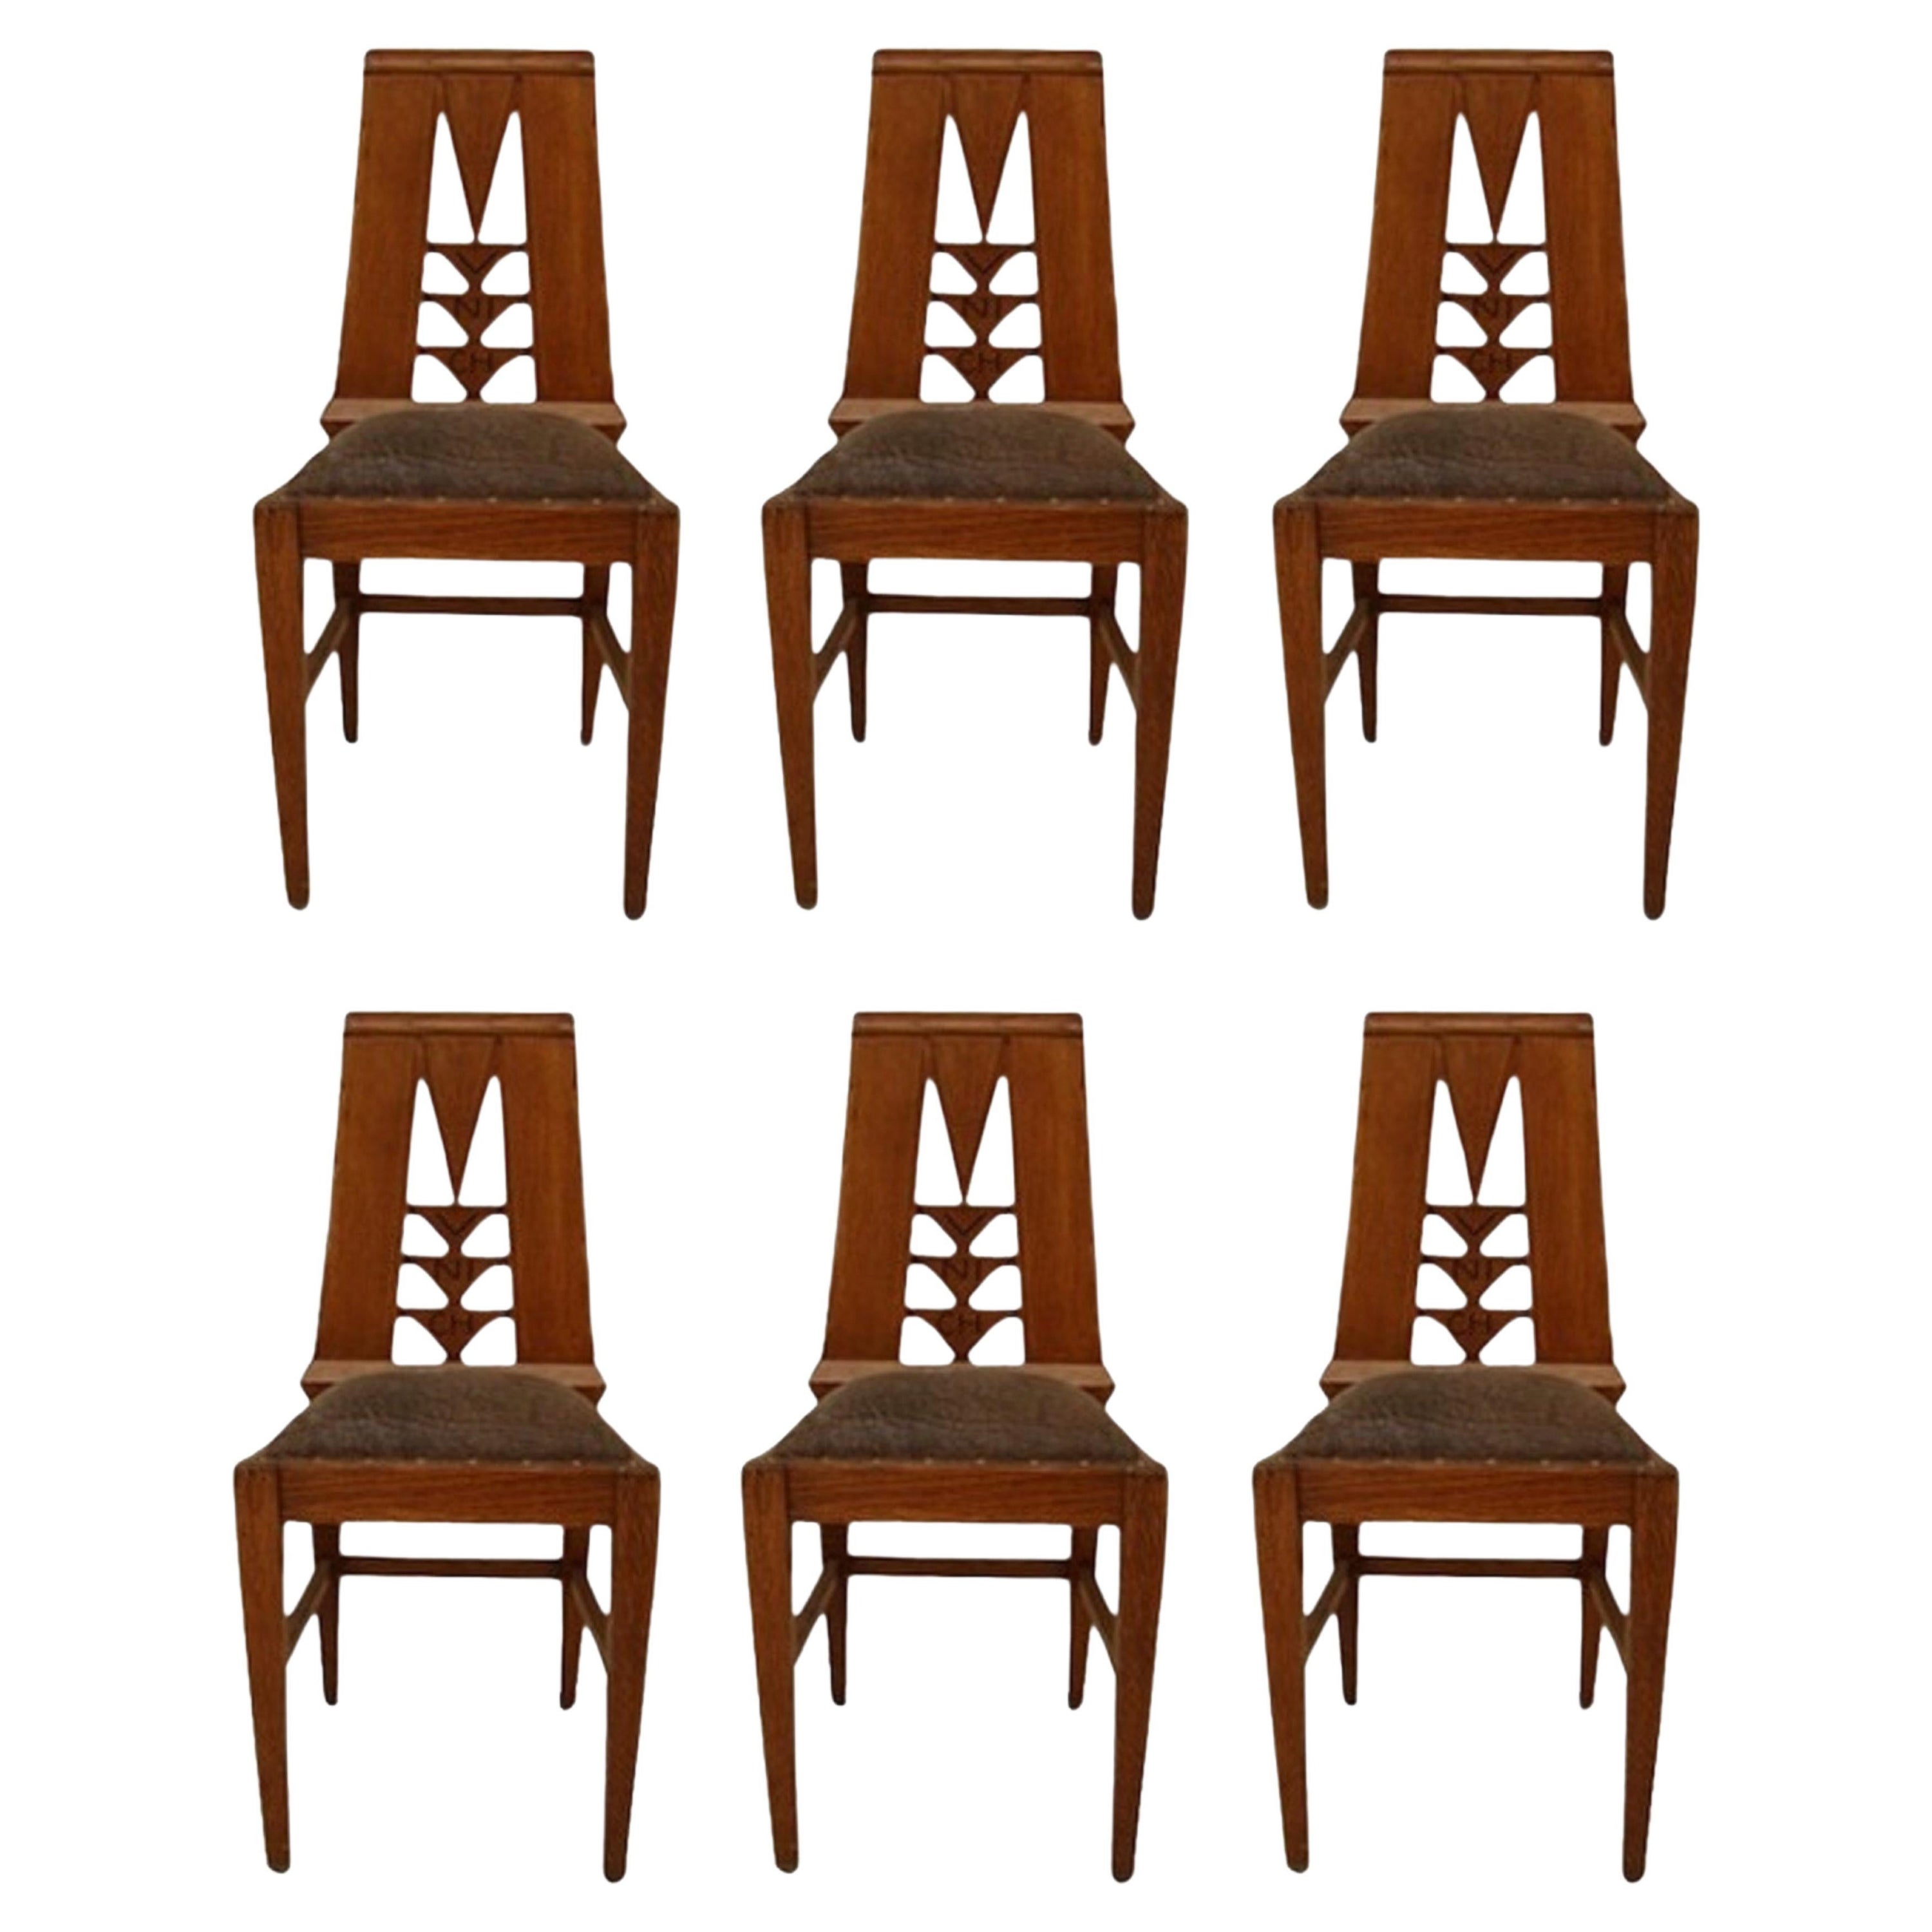 Brewery Munich Set 6 Chairs in Wood and Leather Jugendstil, Art Nouveau